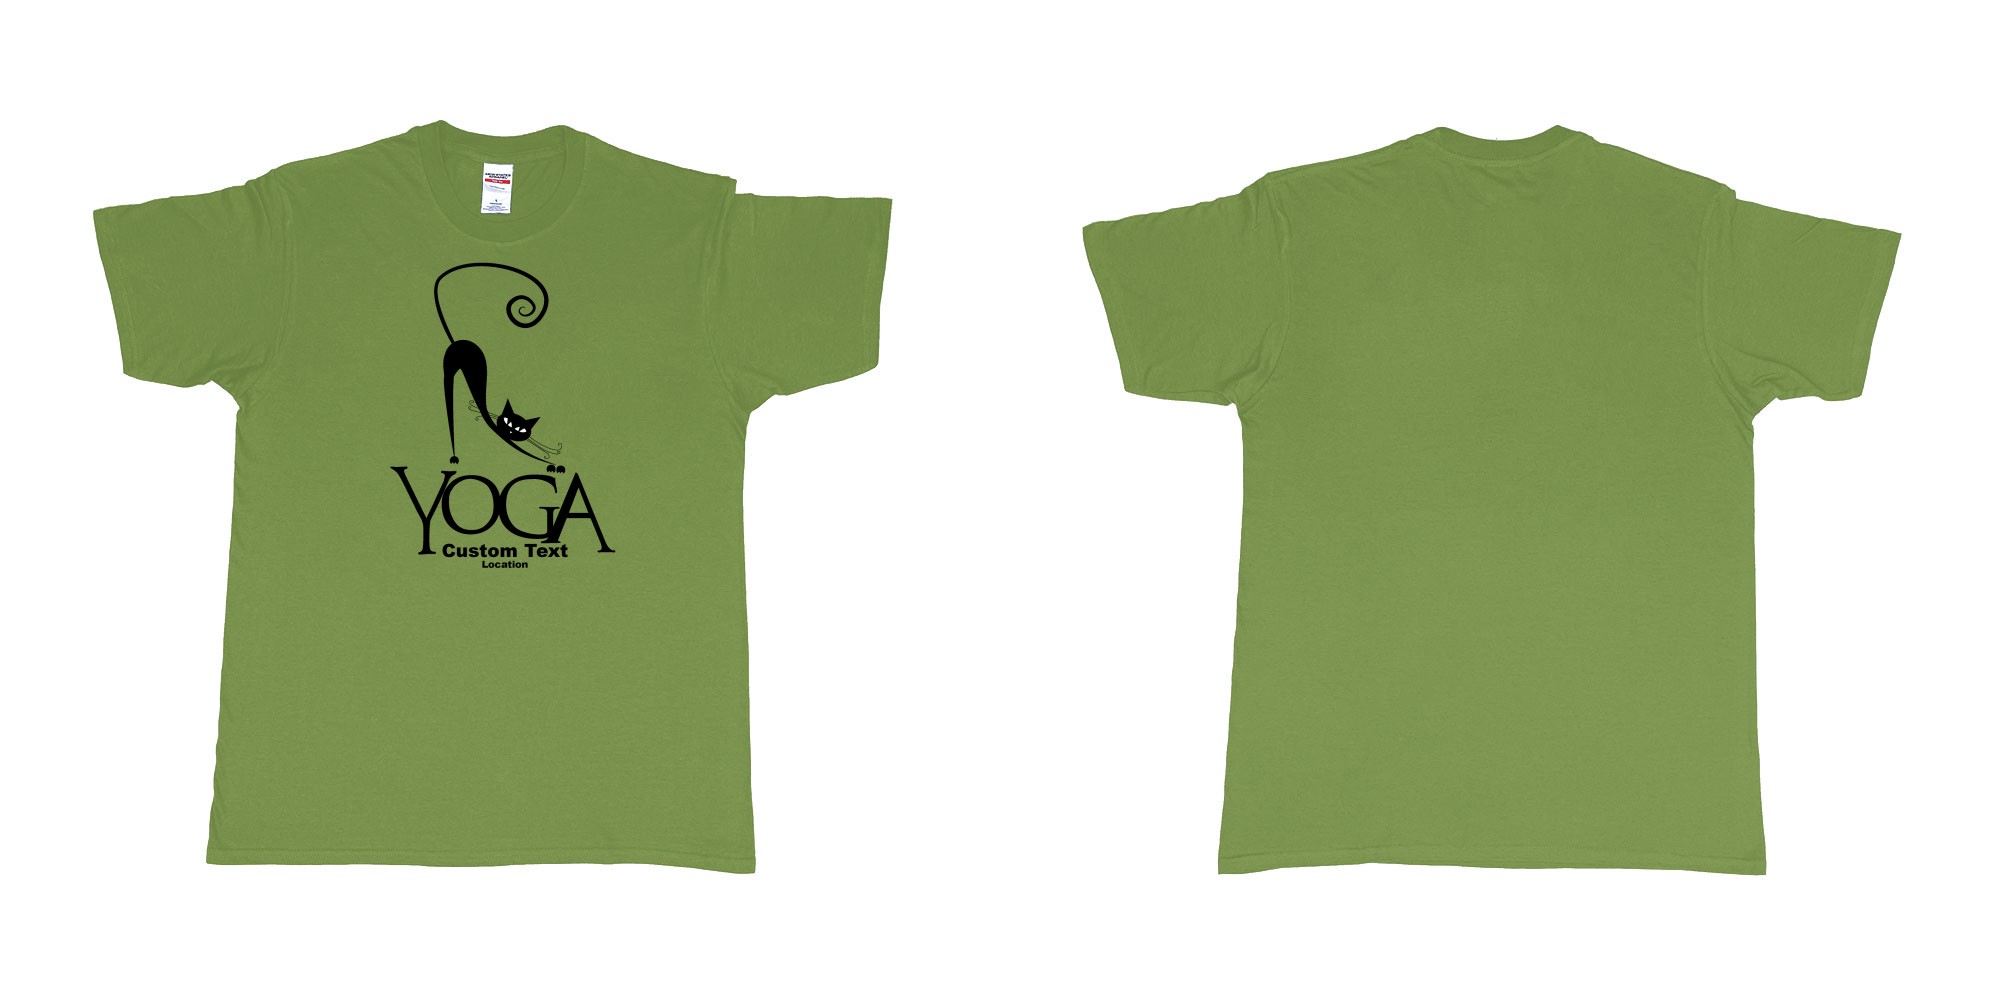 Custom tshirt design cat yoga custom text location print in fabric color military-green choice your own text made in Bali by The Pirate Way